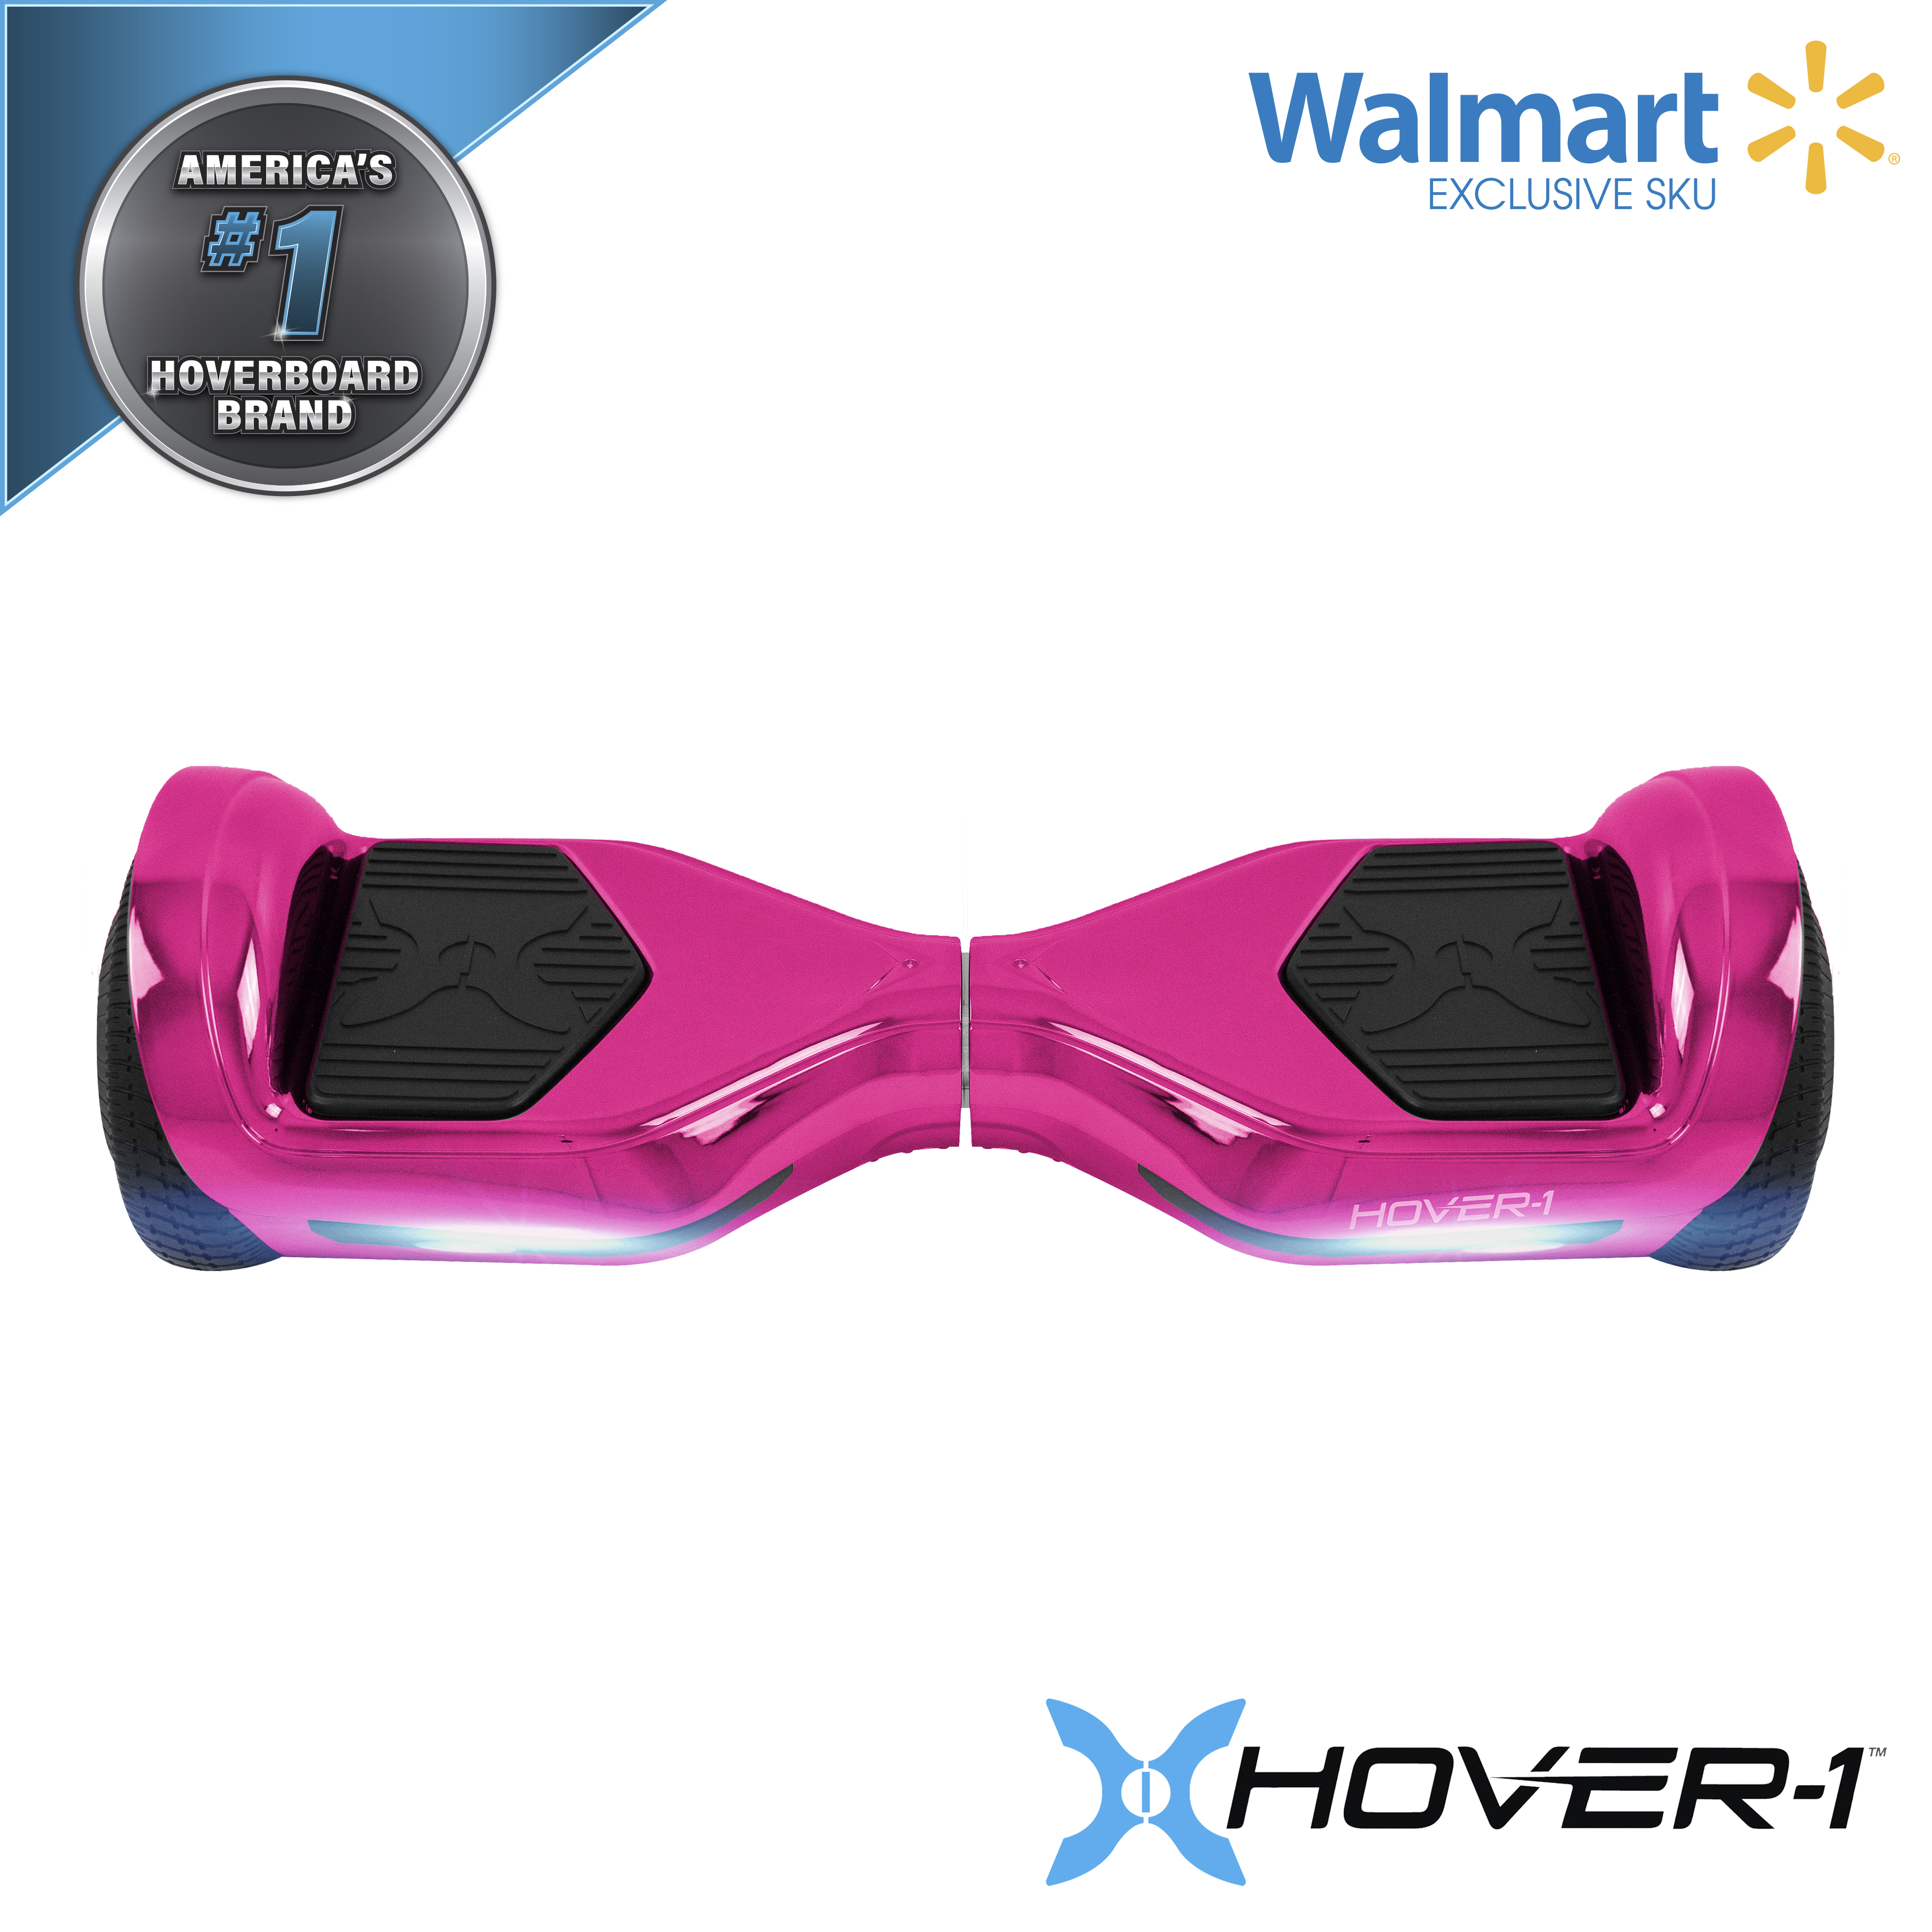 Hover-1 Allstar UL Certified Electric Hoverboard w/ 6.5" Wheels and LED Lights - Pink - image 4 of 6